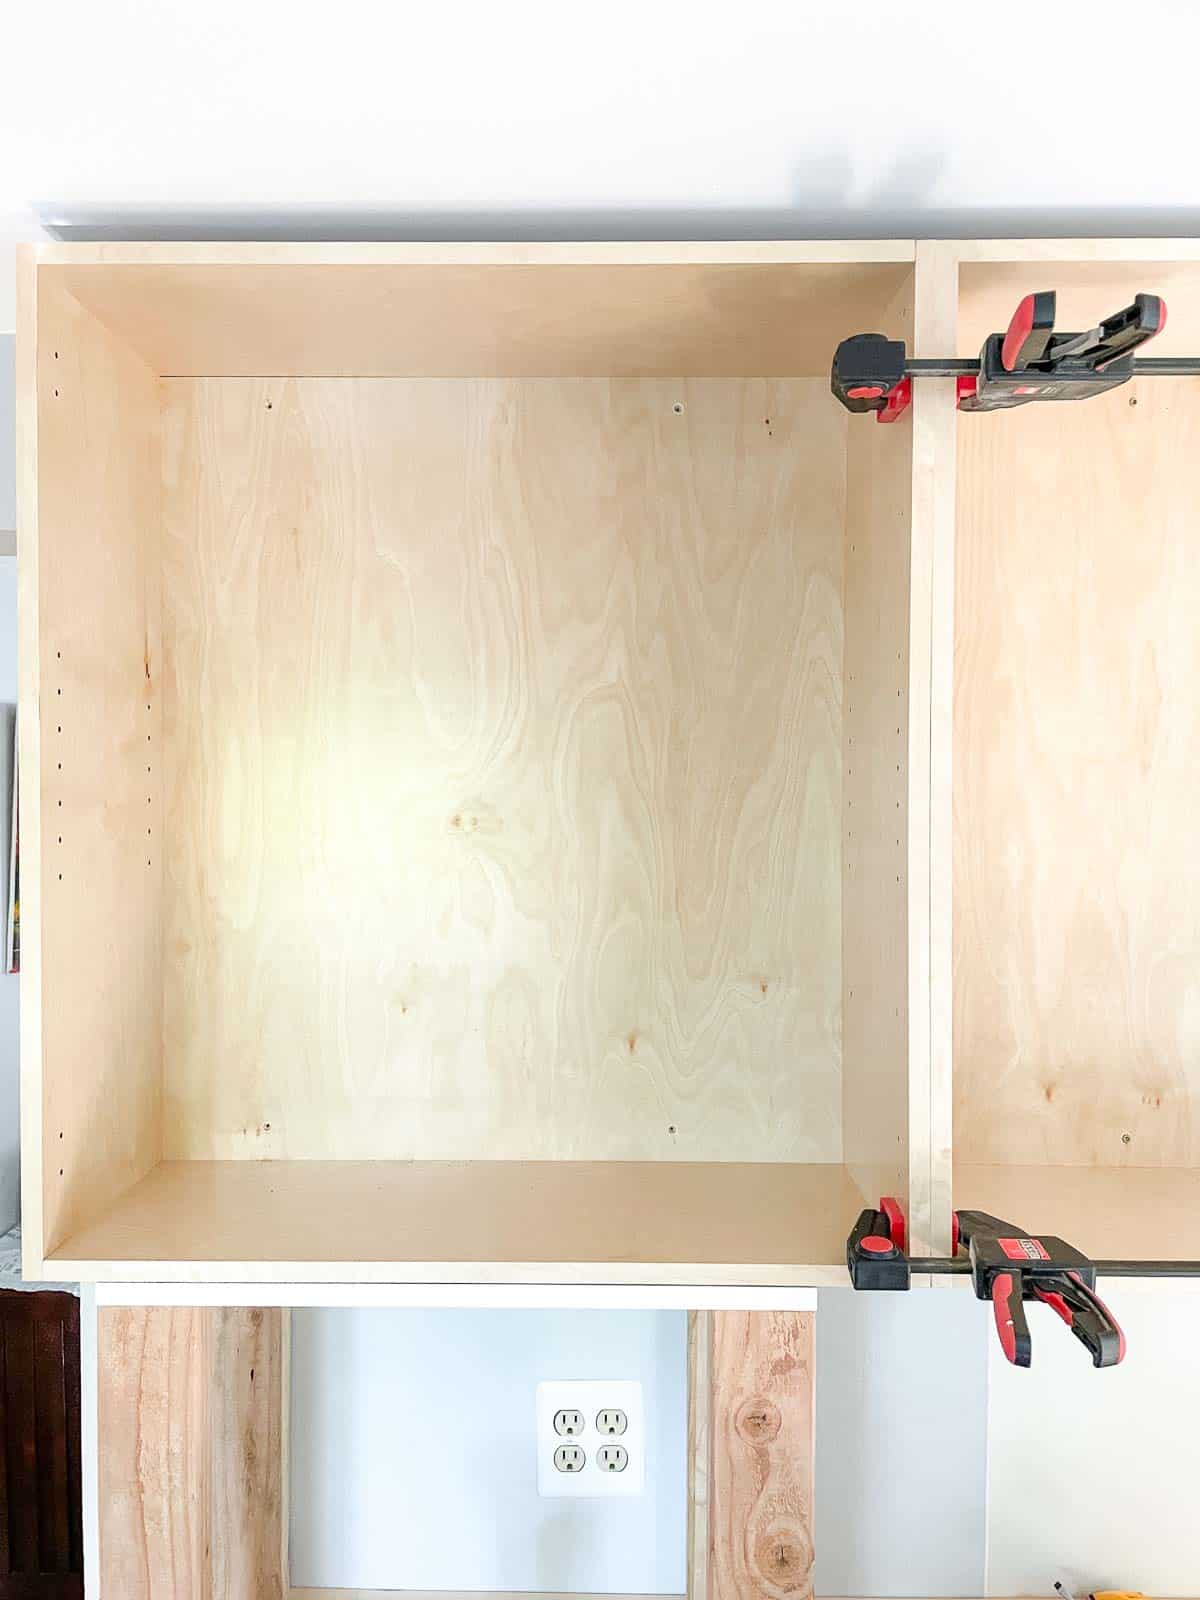 How to Install Wall Cabinets (by Yourself!) - The Handyman